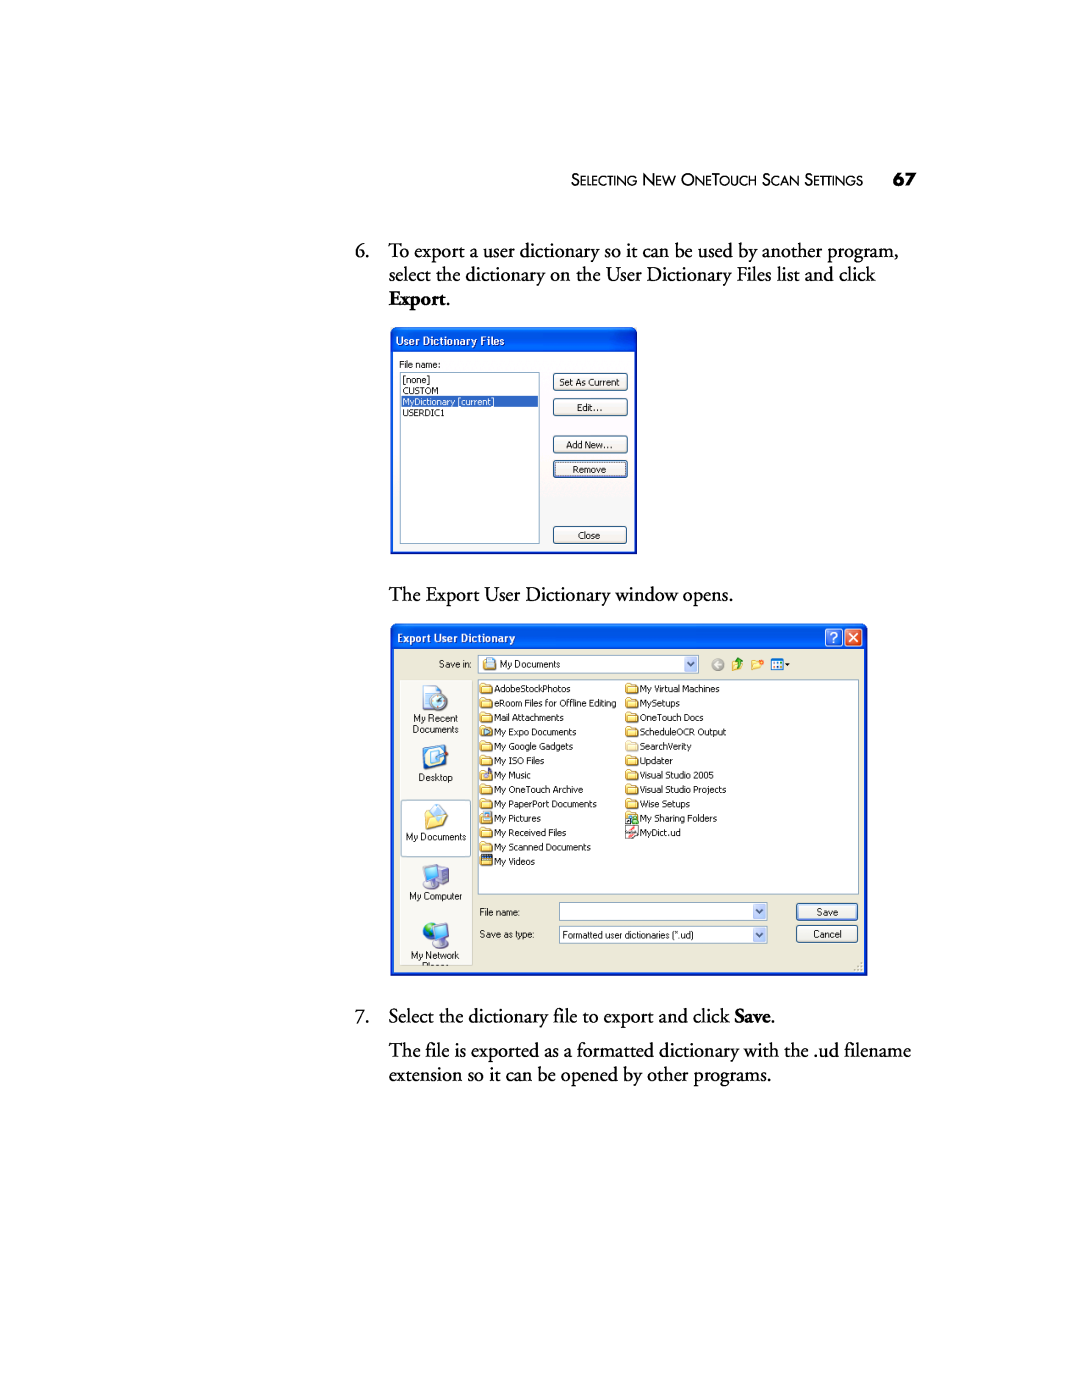 Visioneer XP220 manual The Export User Dictionary window opens, Select the dictionary file to export and click Save 